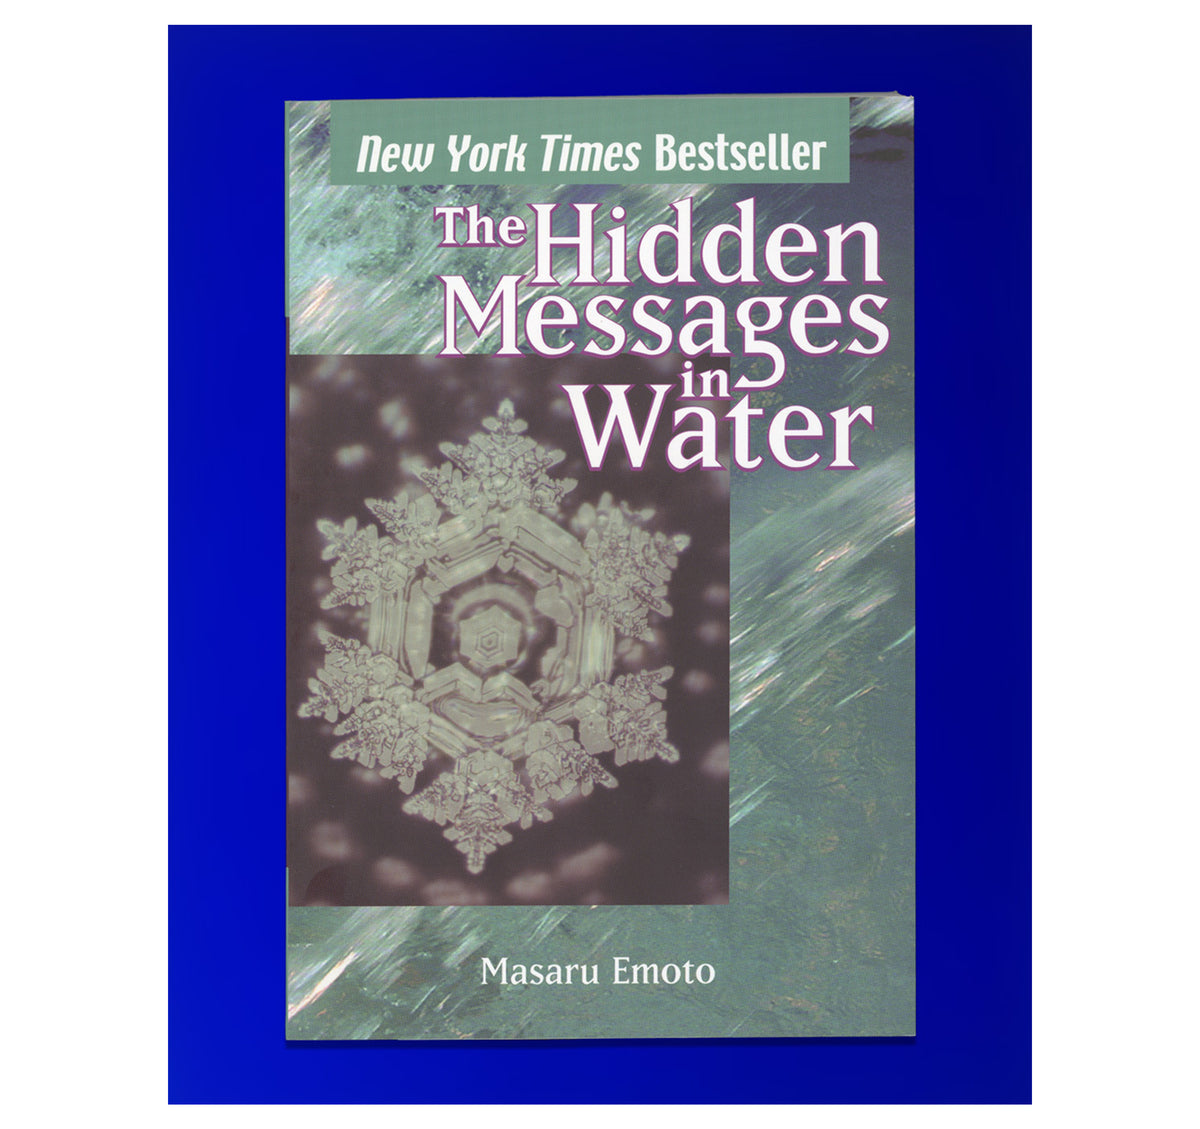 THE HIDDEN MESSAGES IN WATER by MASARU EMOTO